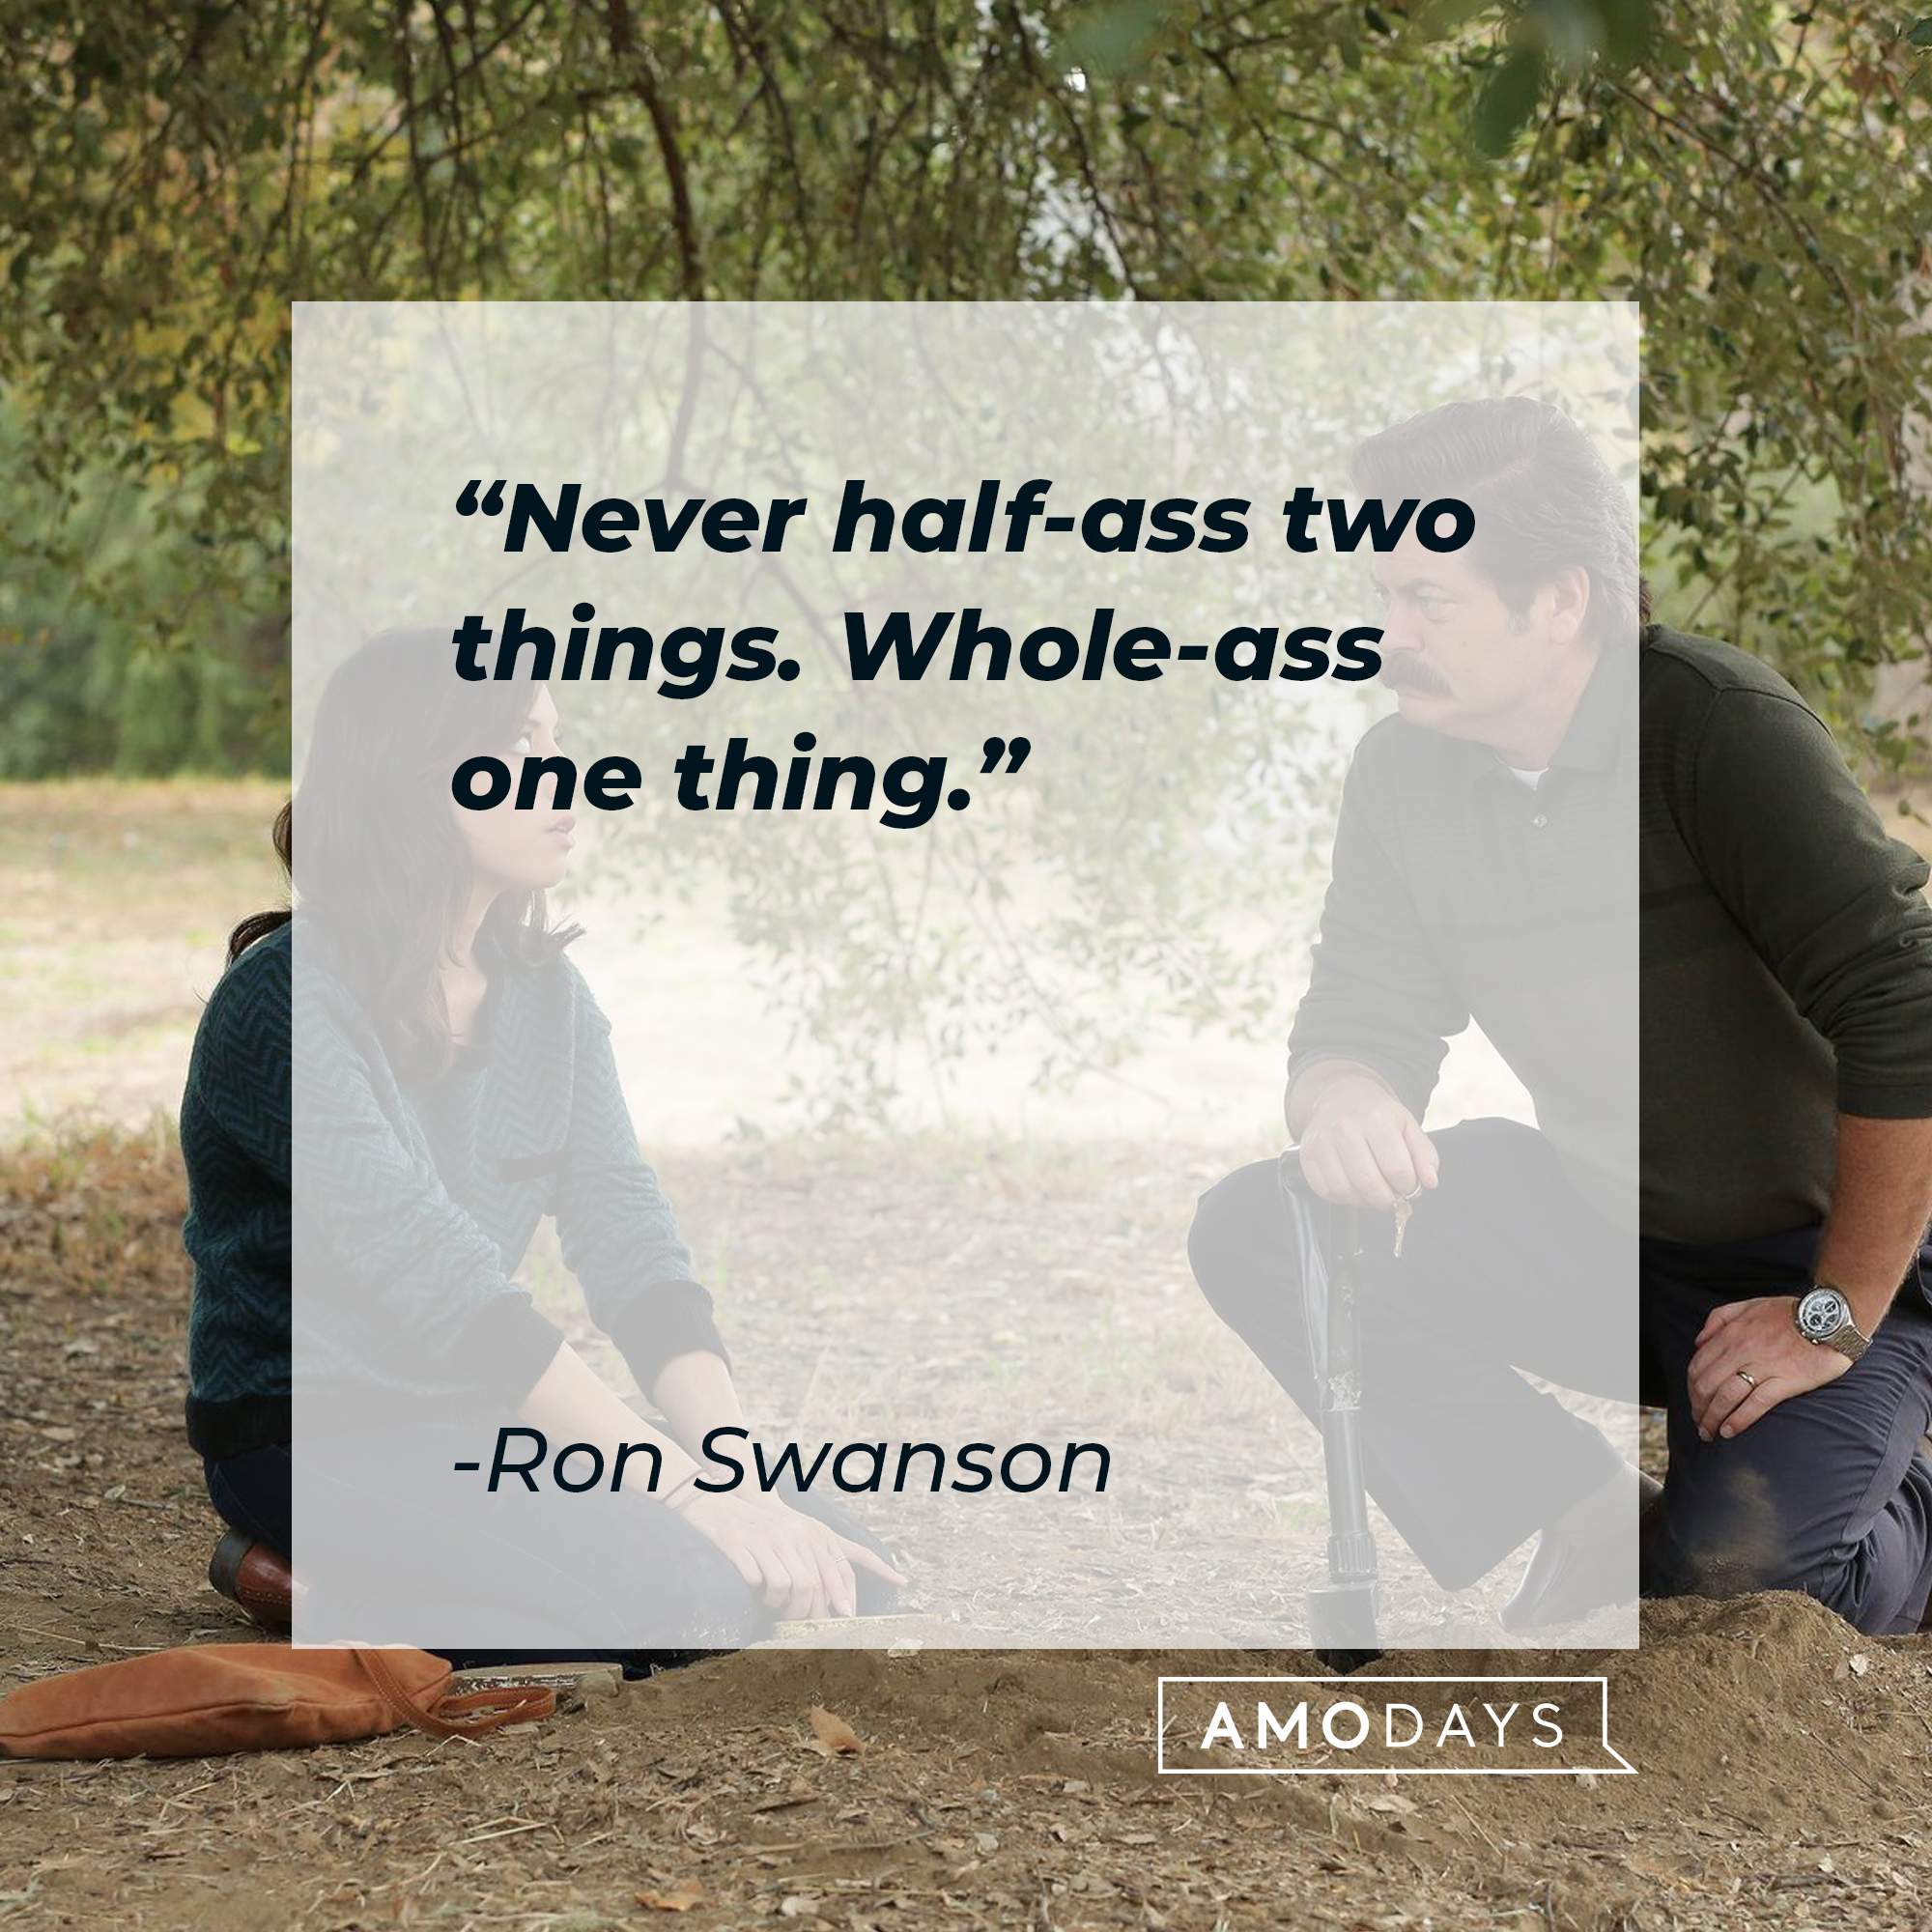 Ron Swanson’s quote: "Never half-ass two things. Whole-ass one thing." | Image: Facebook.com/parksandrecreation